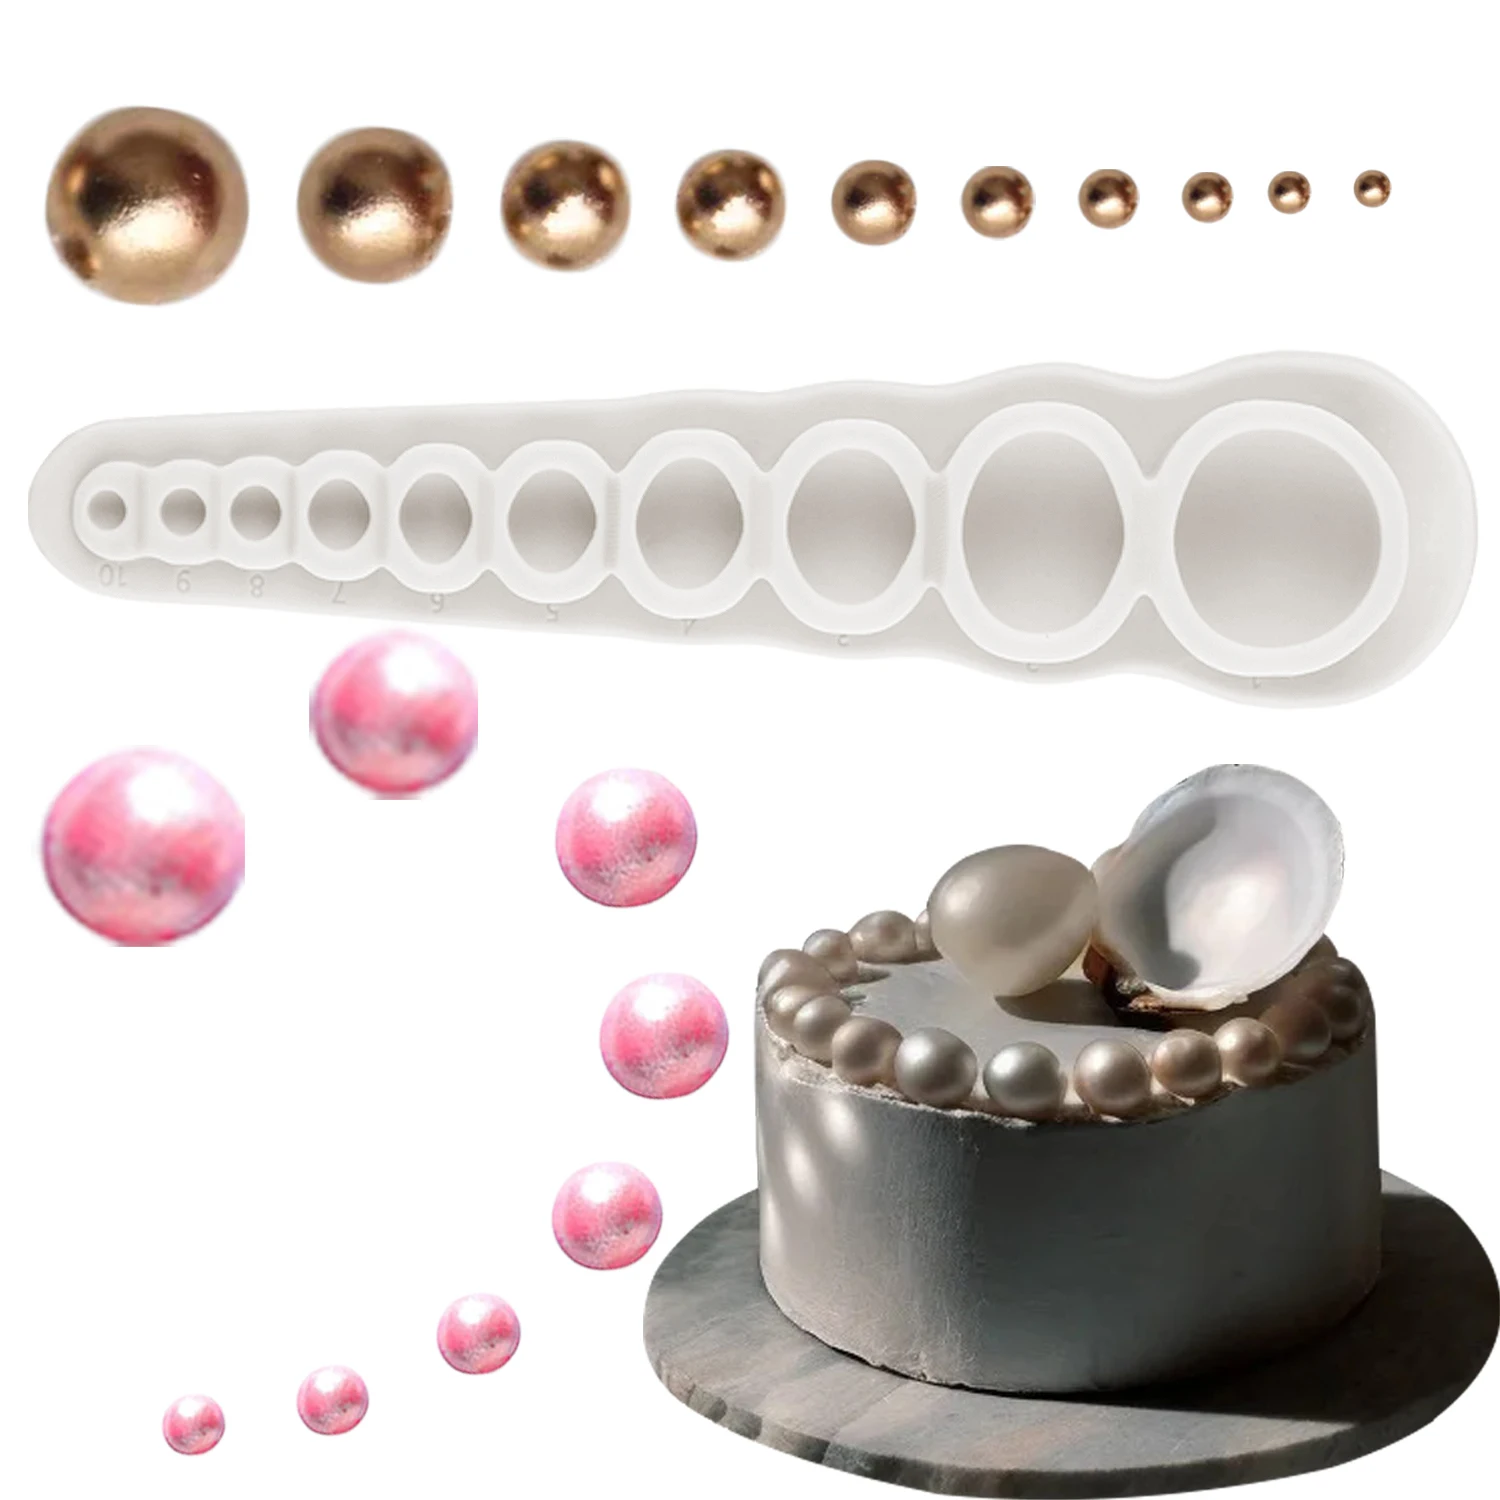 

Pearl Circle Silicone Sugarcraft Mold Cupcake Baking Mould Resin Tools Chocolate Gumpaste Candy Moulds Fondant Cake Decoration